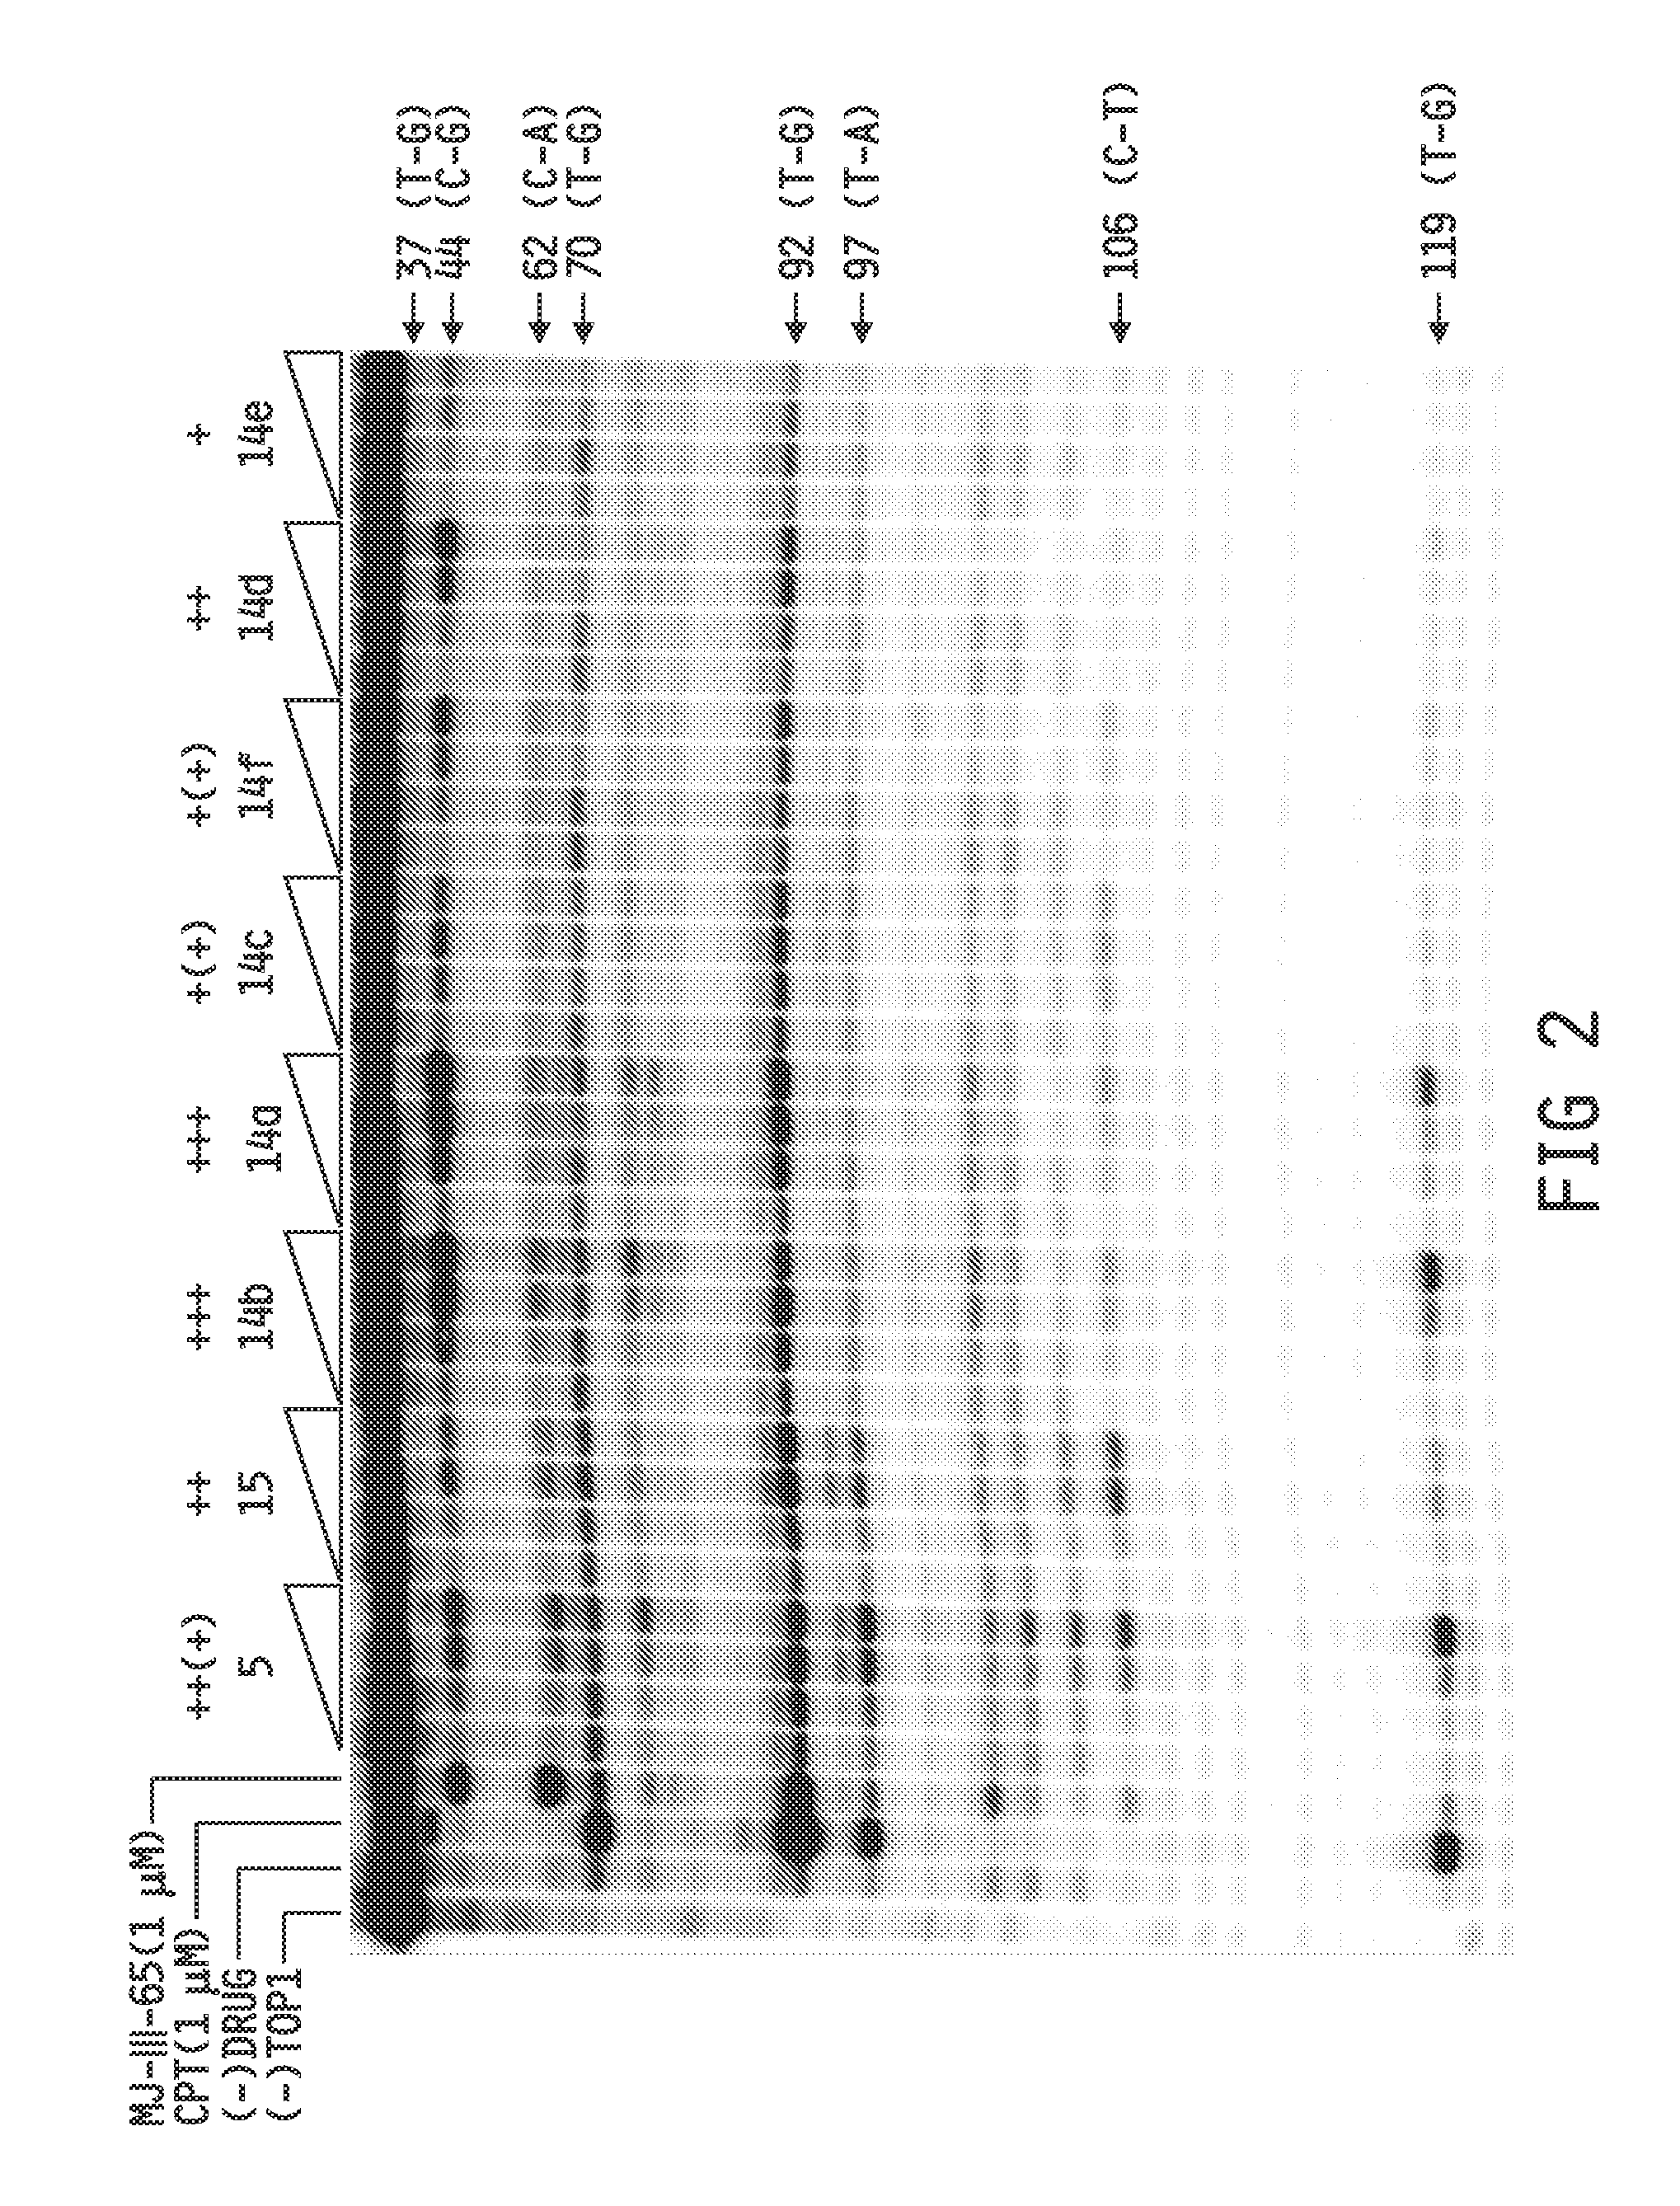 Substituted norindenoisoquinolines, syntheses thereof, and methods of use